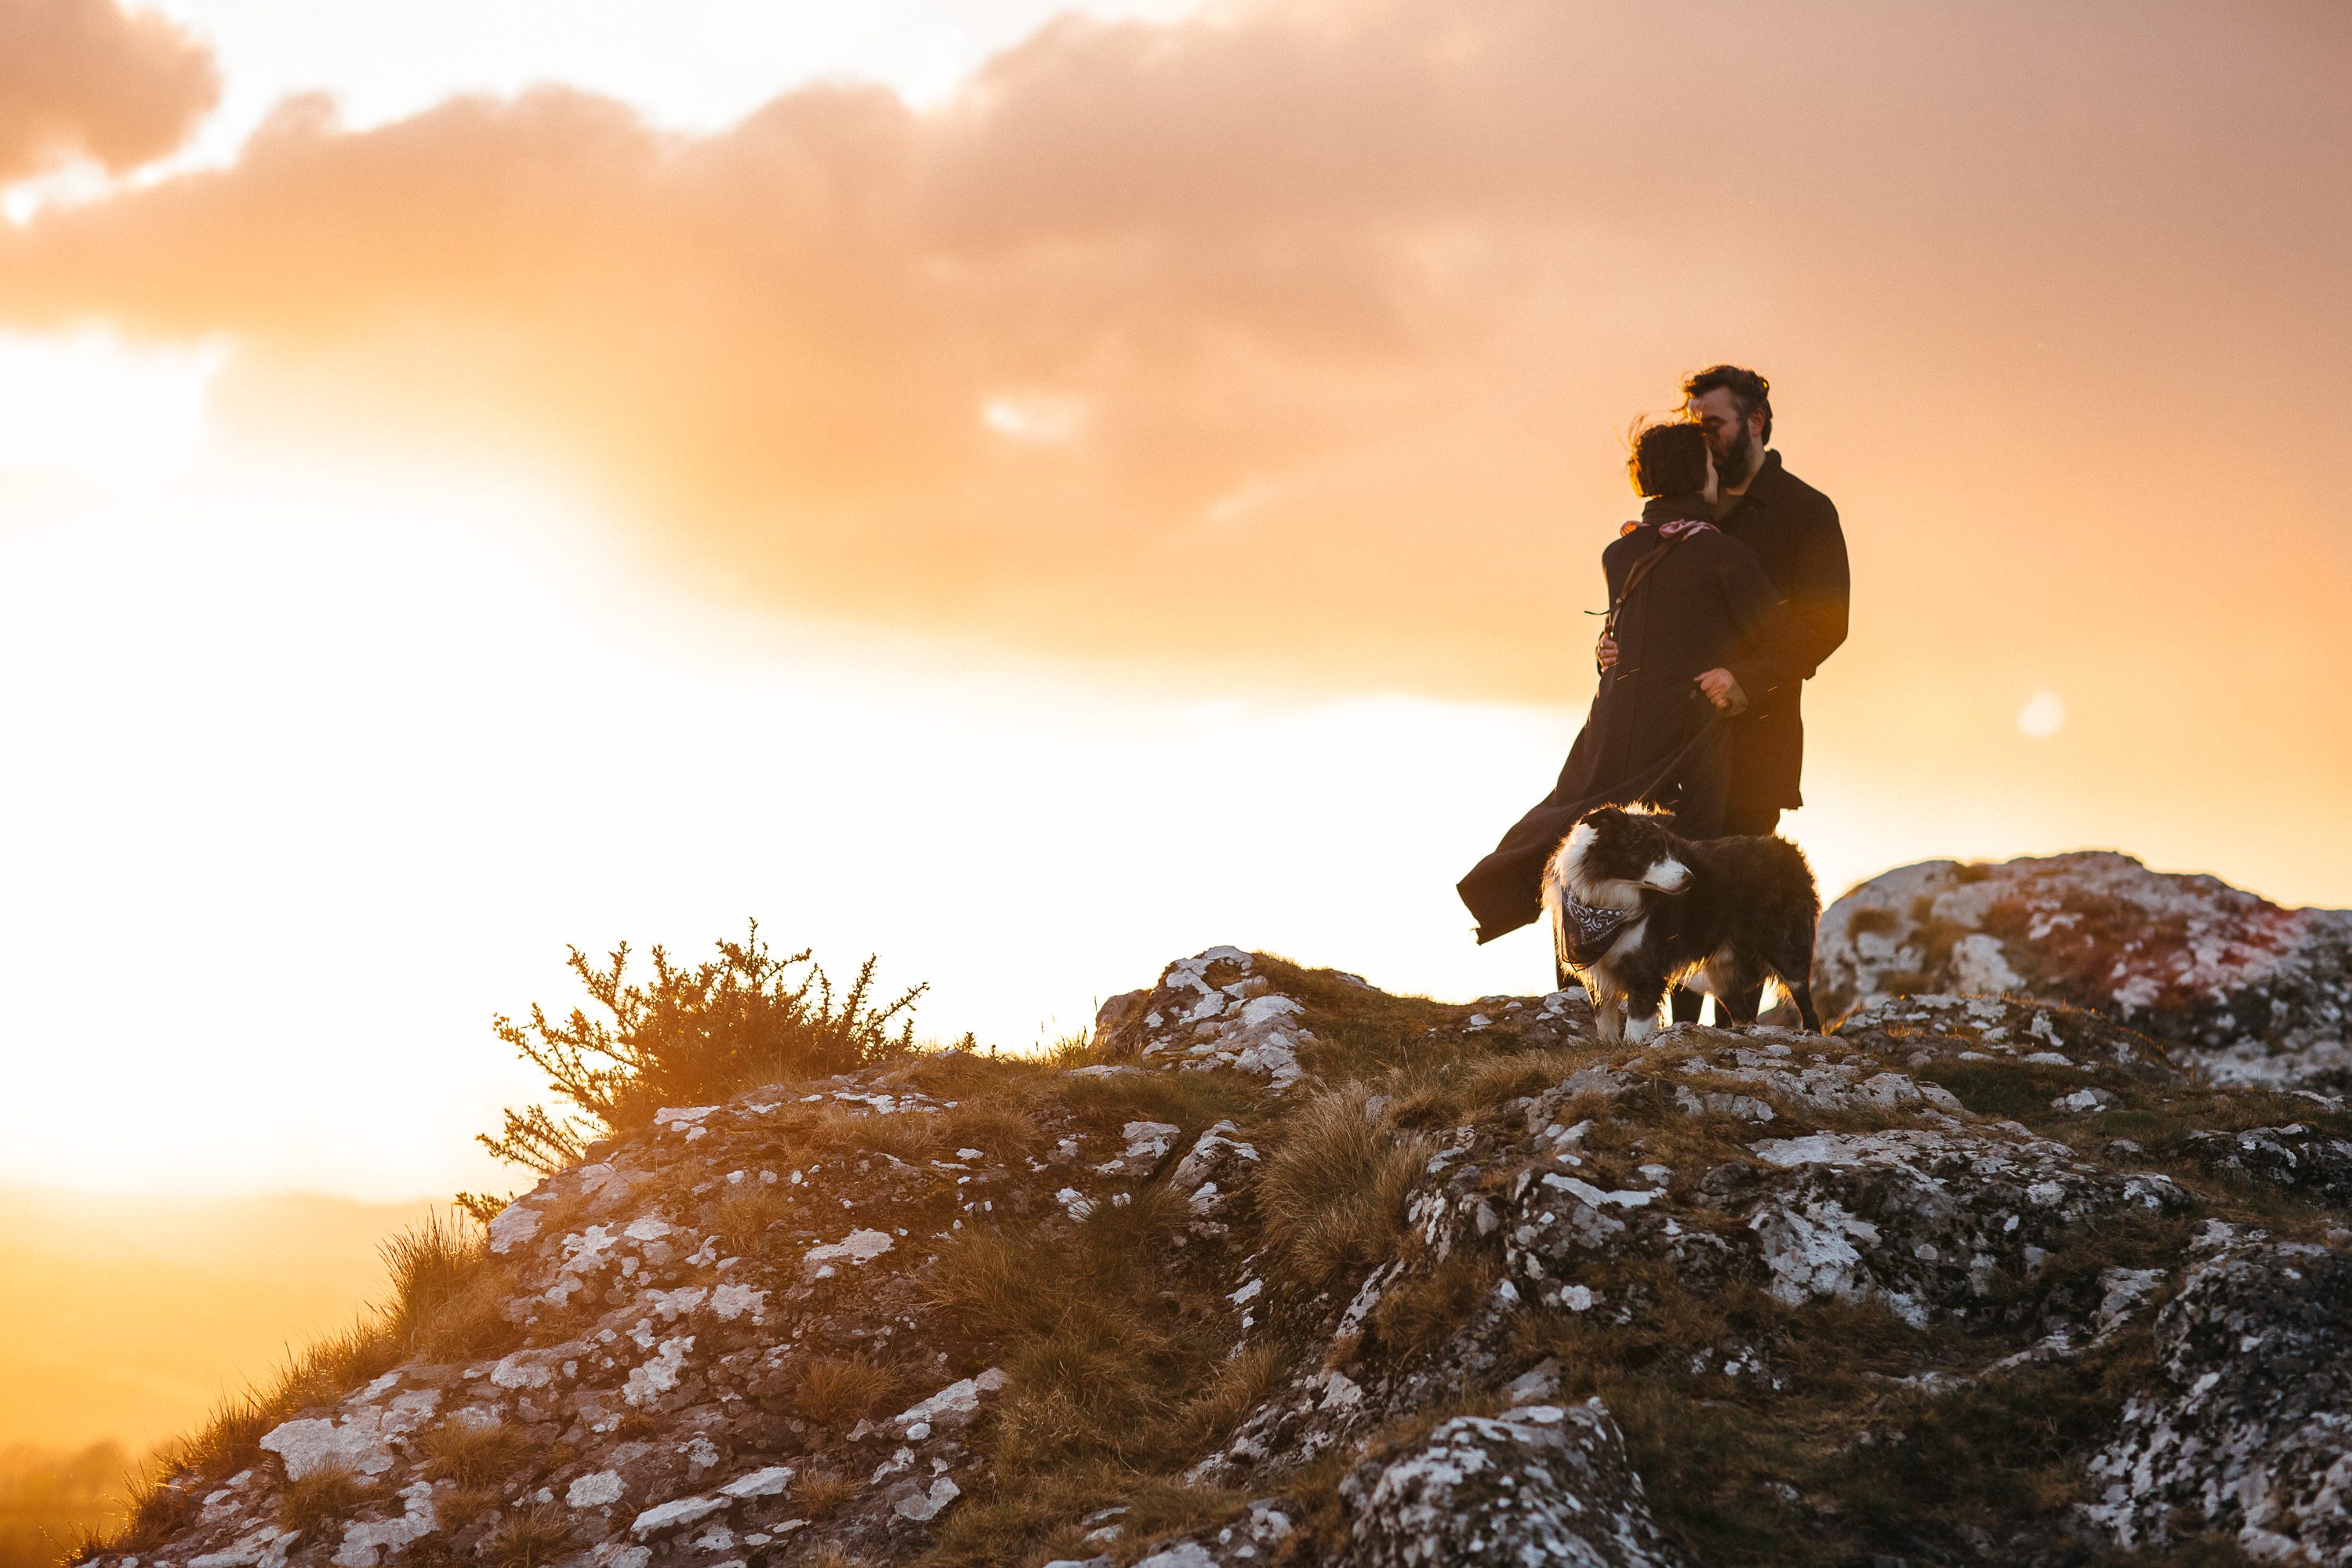 Engagement shoot at sunset on Brentor_Dartmoor_Devon_by Freckle Photography